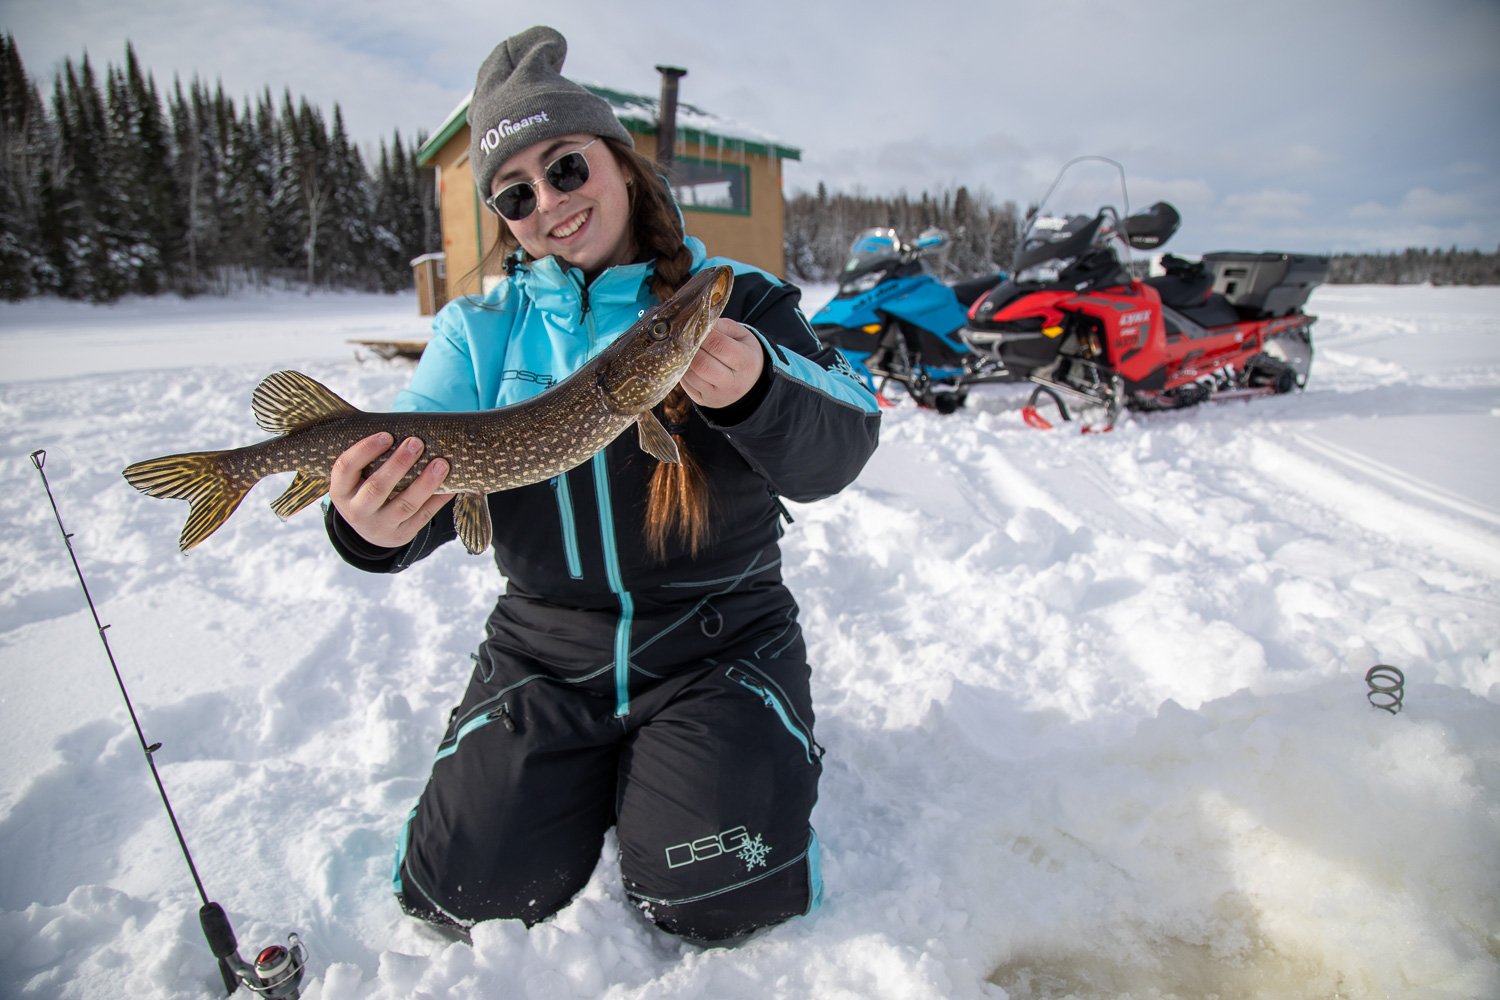 Hook, Line, and Ice: The Beginner's Guide to Epic Ice Fishing